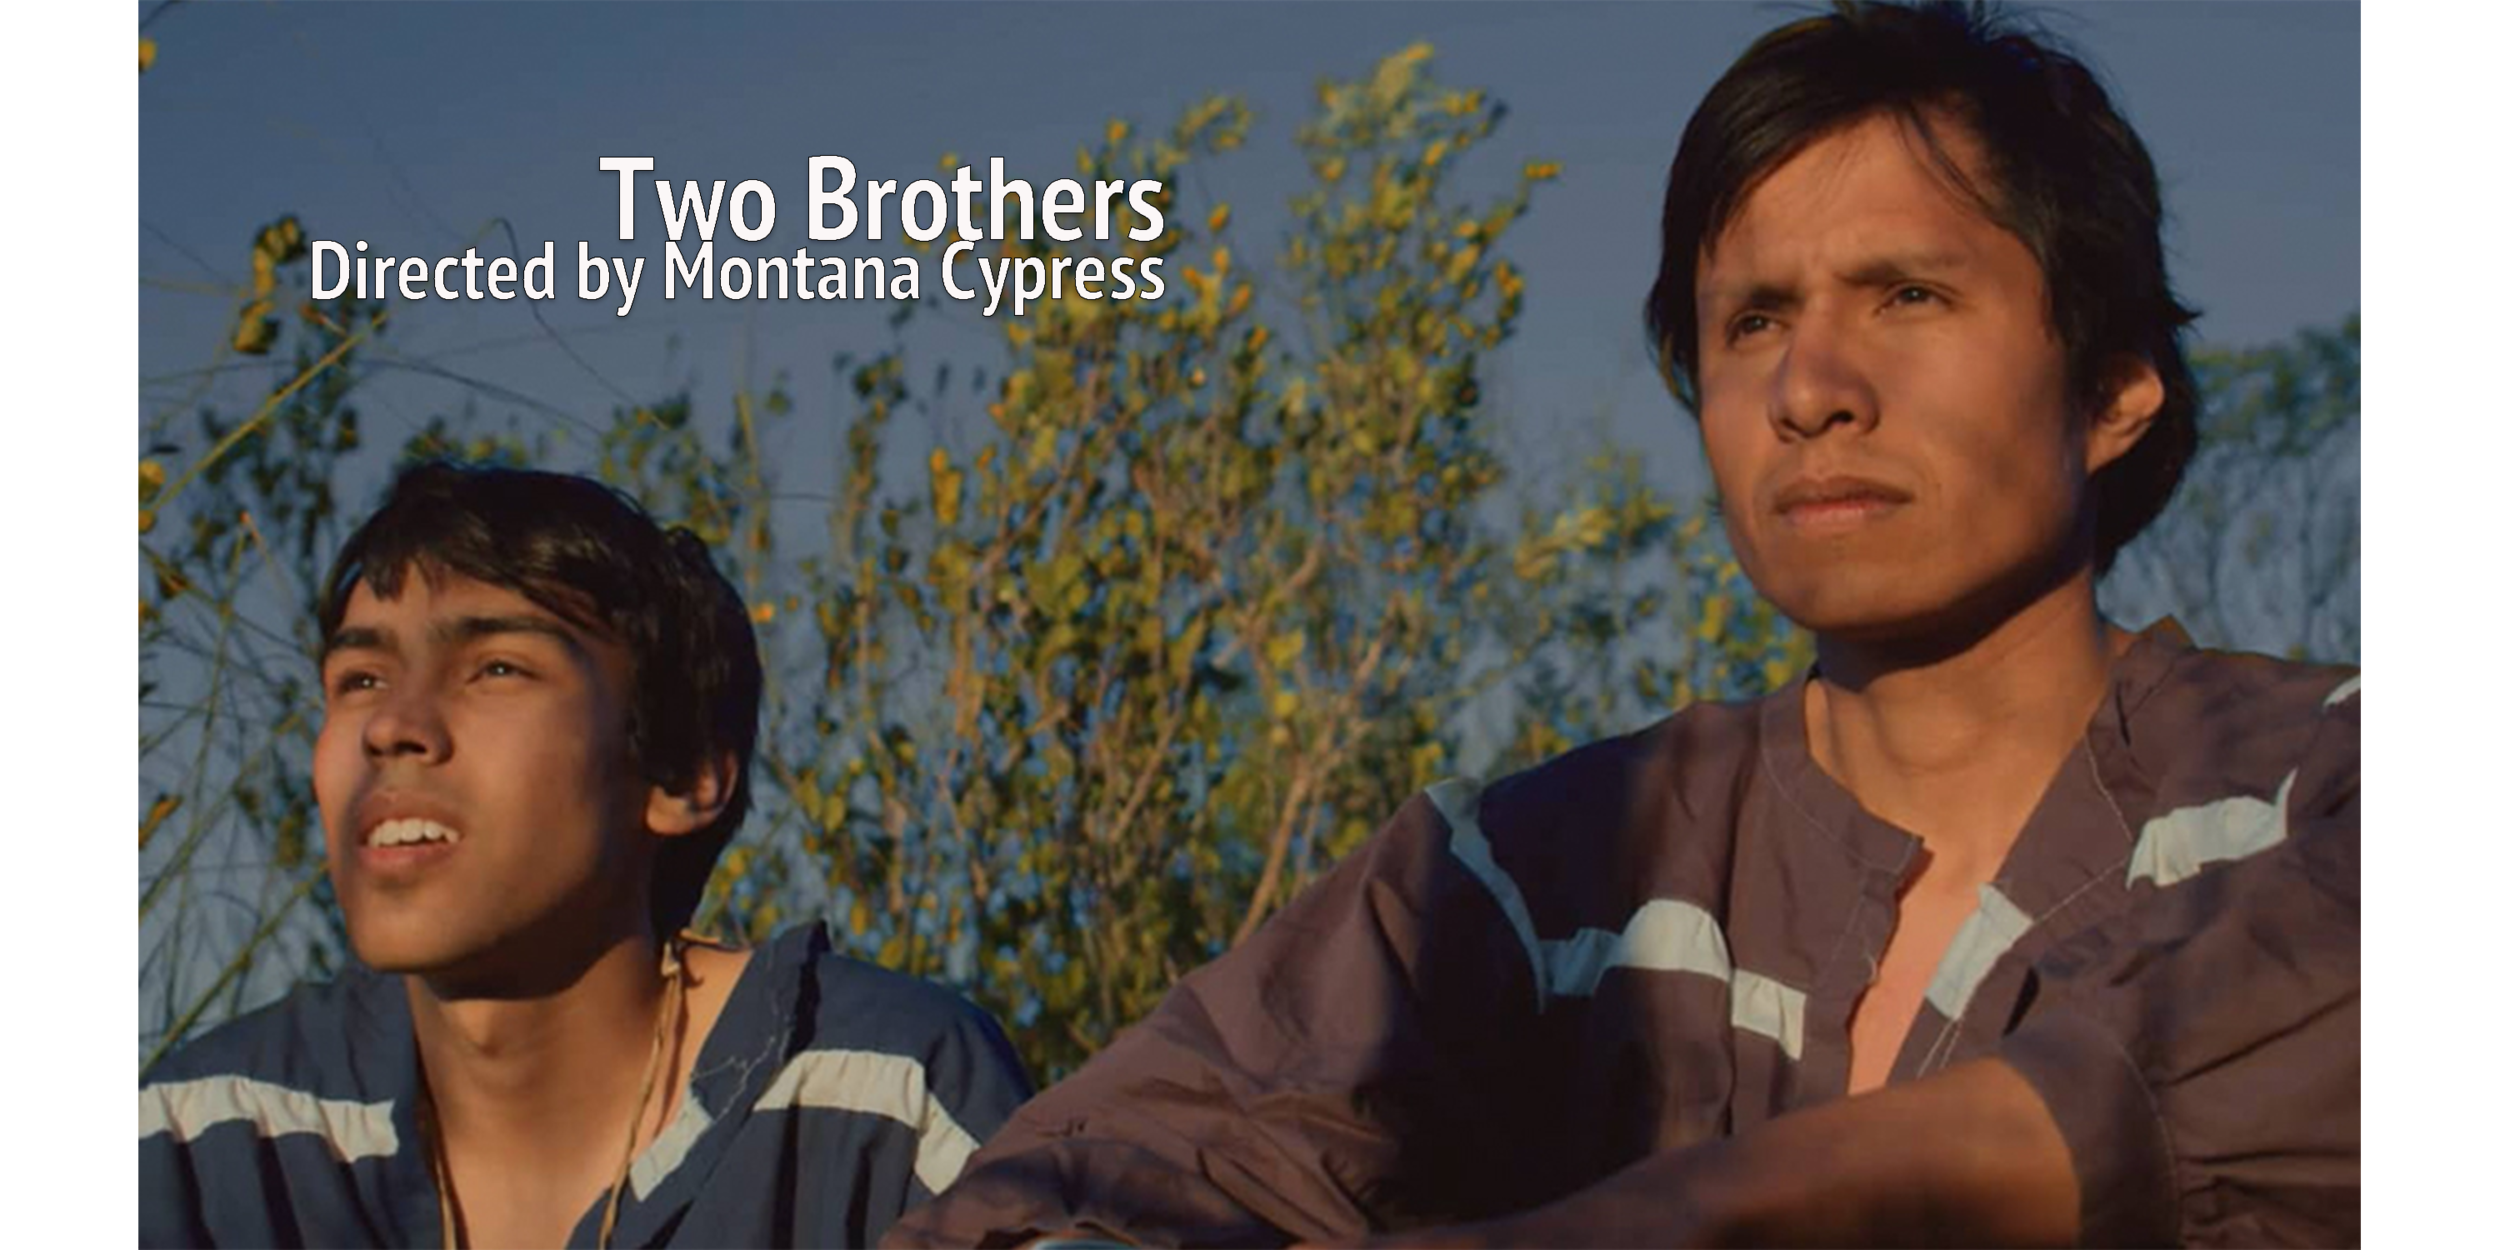 TwoBrothers_website.png